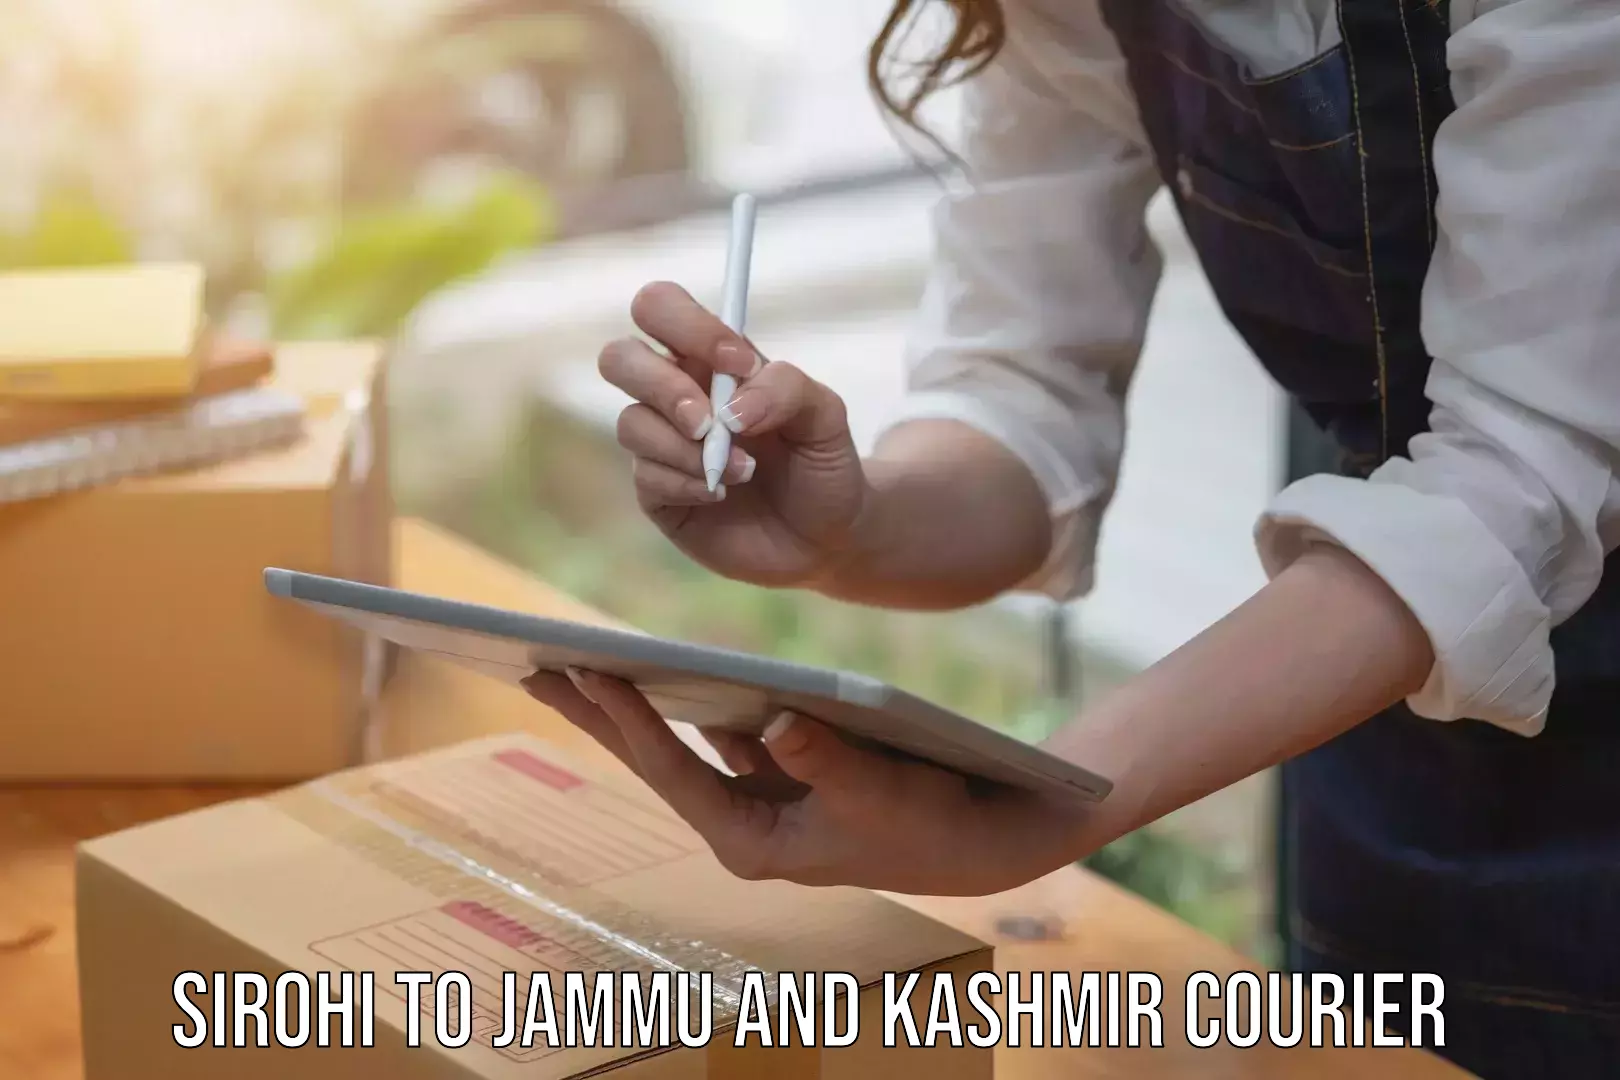 Nationwide parcel services Sirohi to Jammu and Kashmir